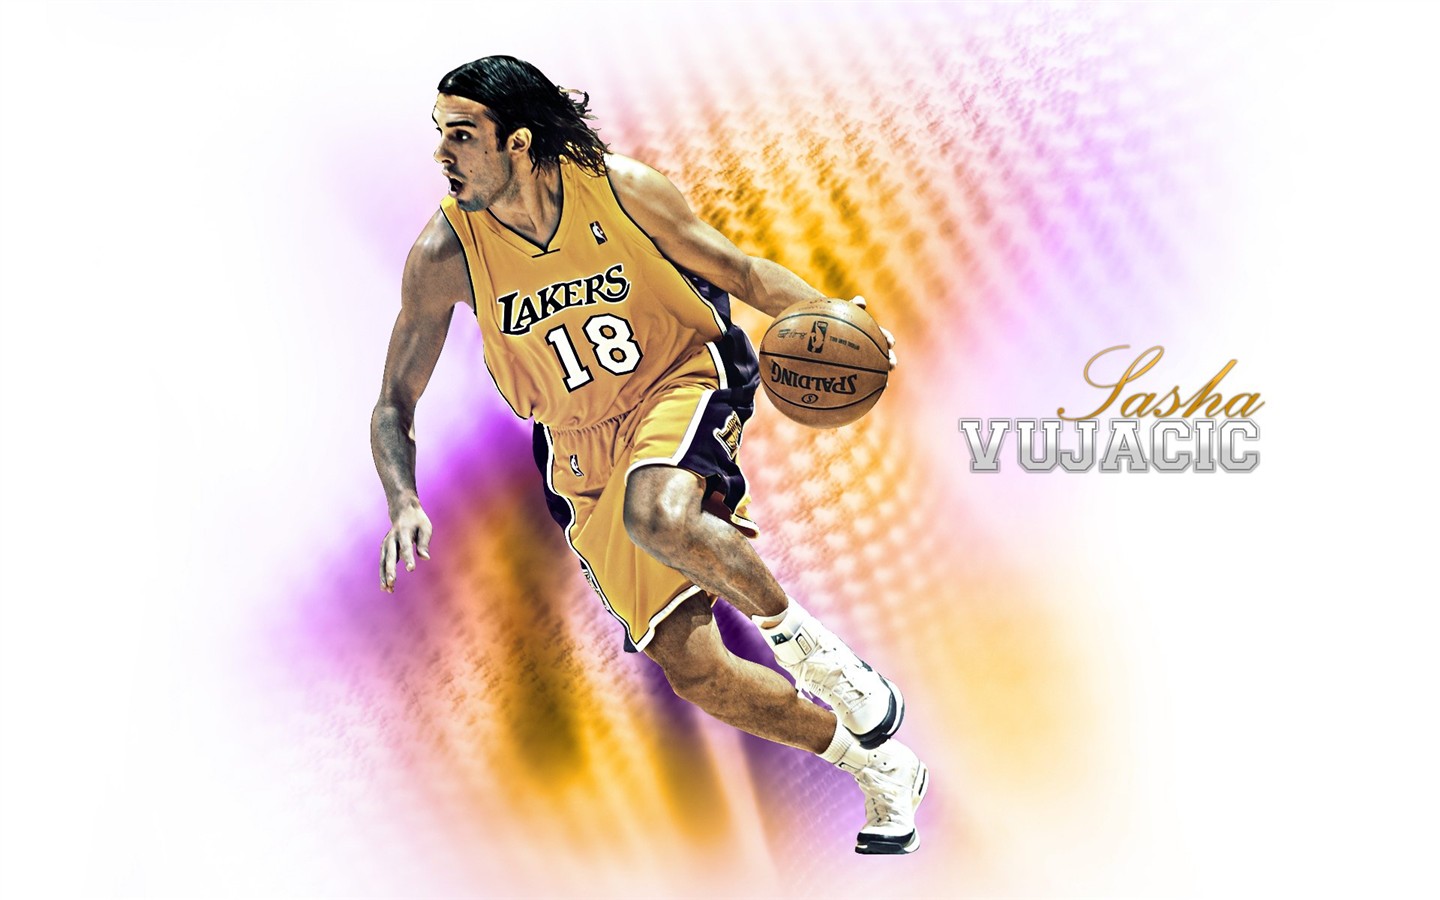 Los Angeles Lakers Wallpaper Oficial #23 - 1440x900